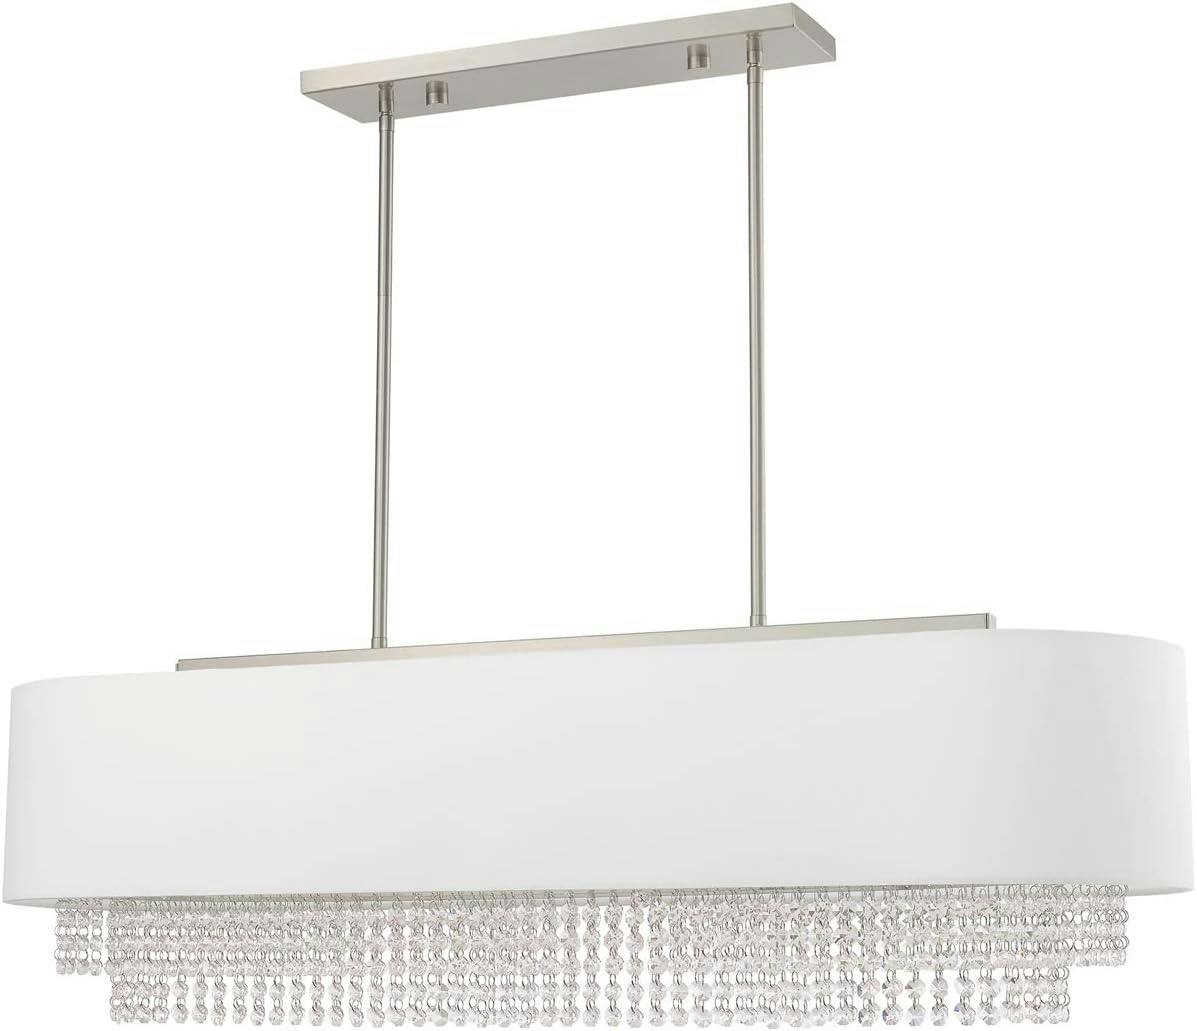 Carlisle 5-Light Linear Chandelier in Brushed Nickel with Crystal Accents